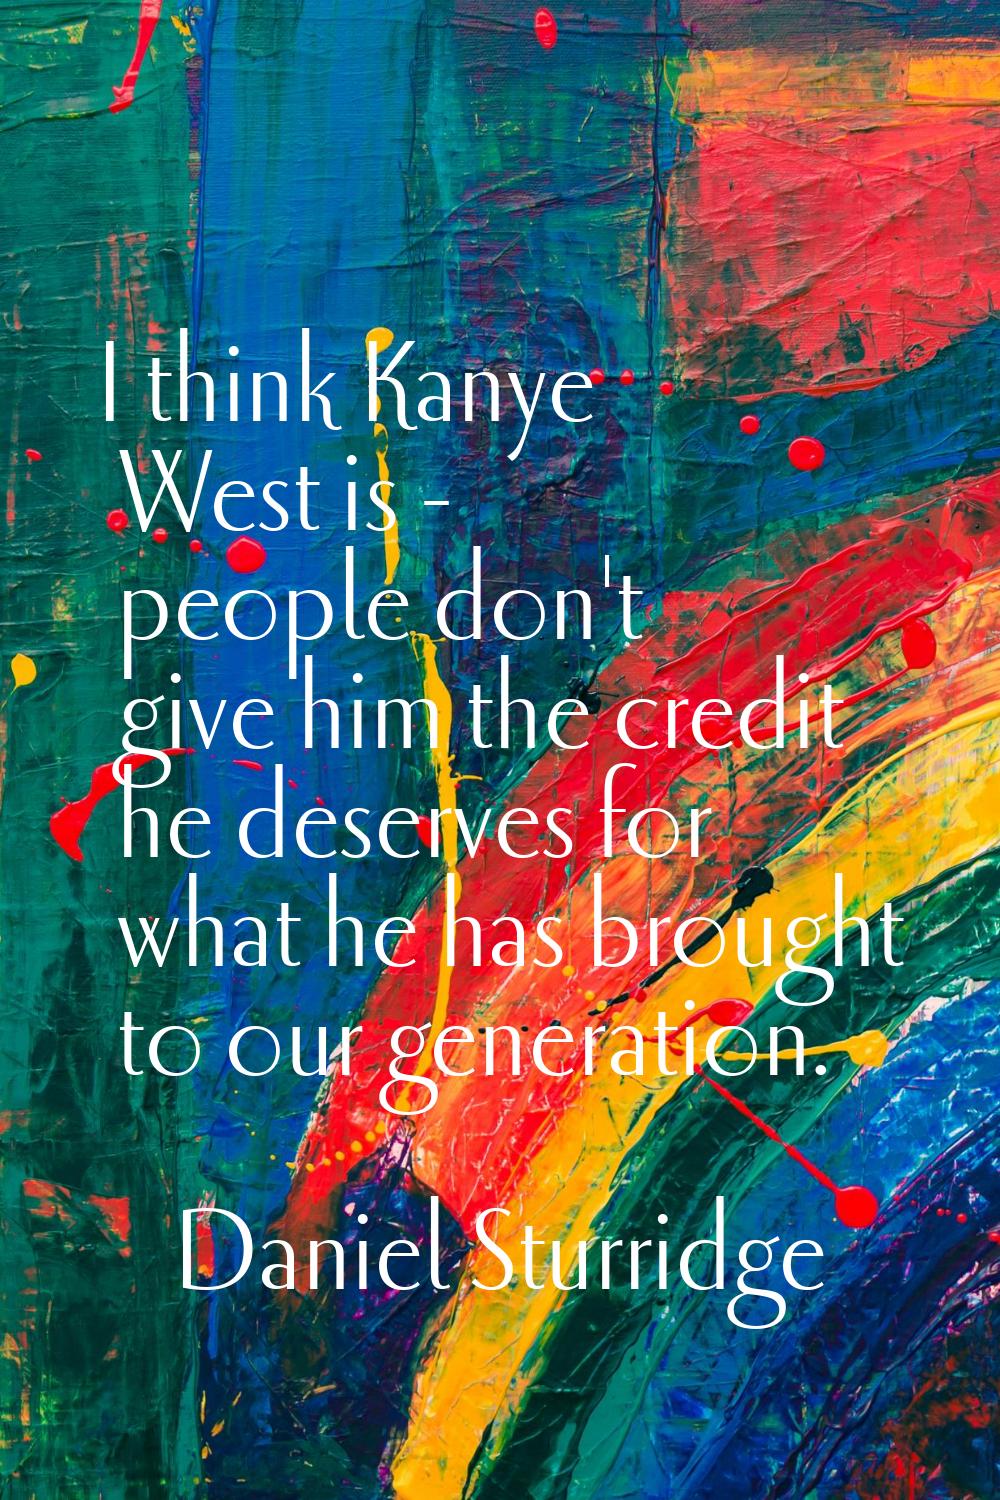 I think Kanye West is - people don't give him the credit he deserves for what he has brought to our